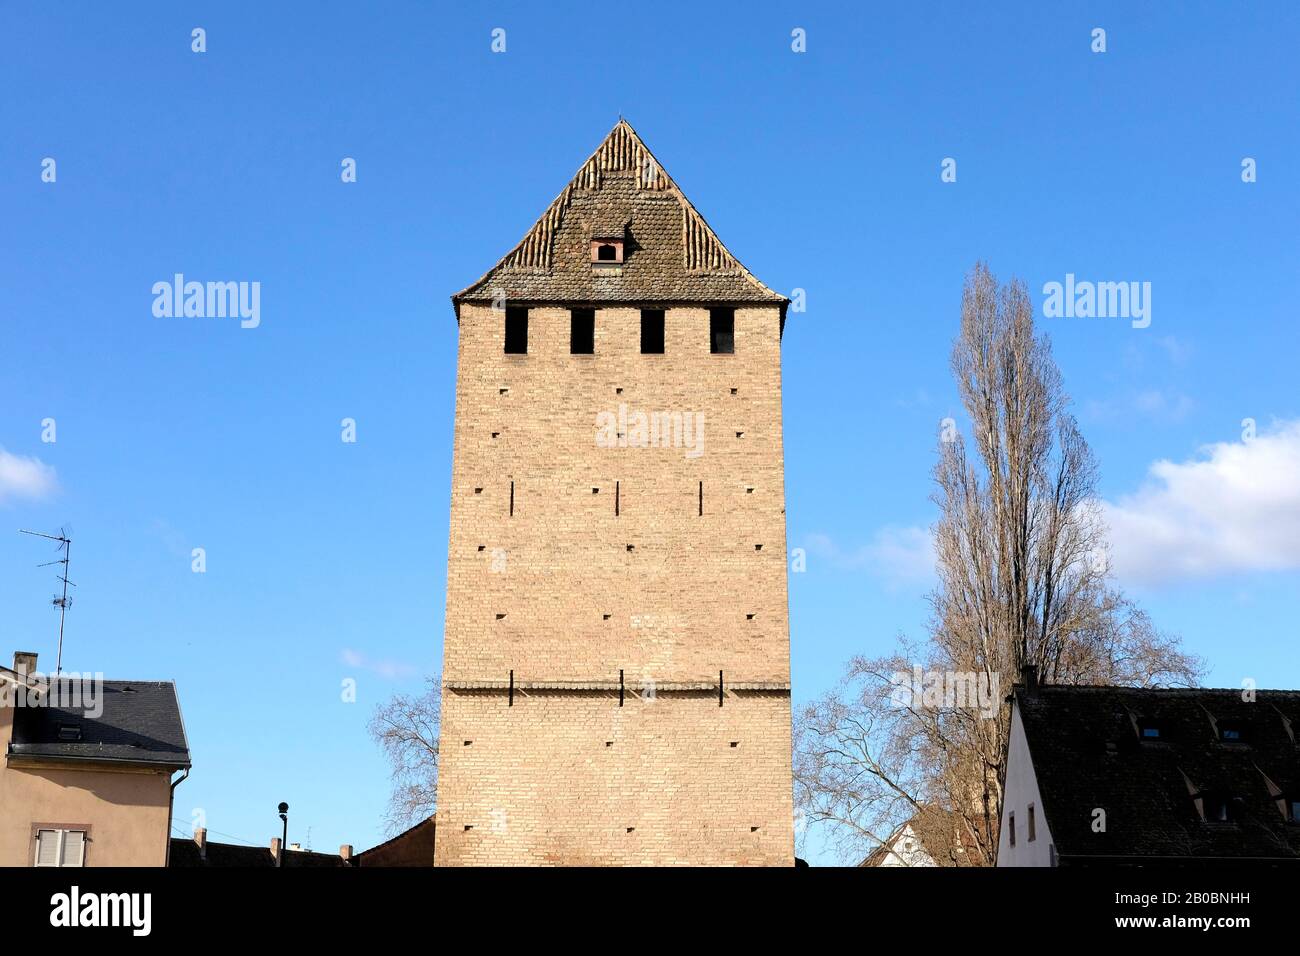 A close up view of one the guard towers in Strasbourg, France Stock Photo